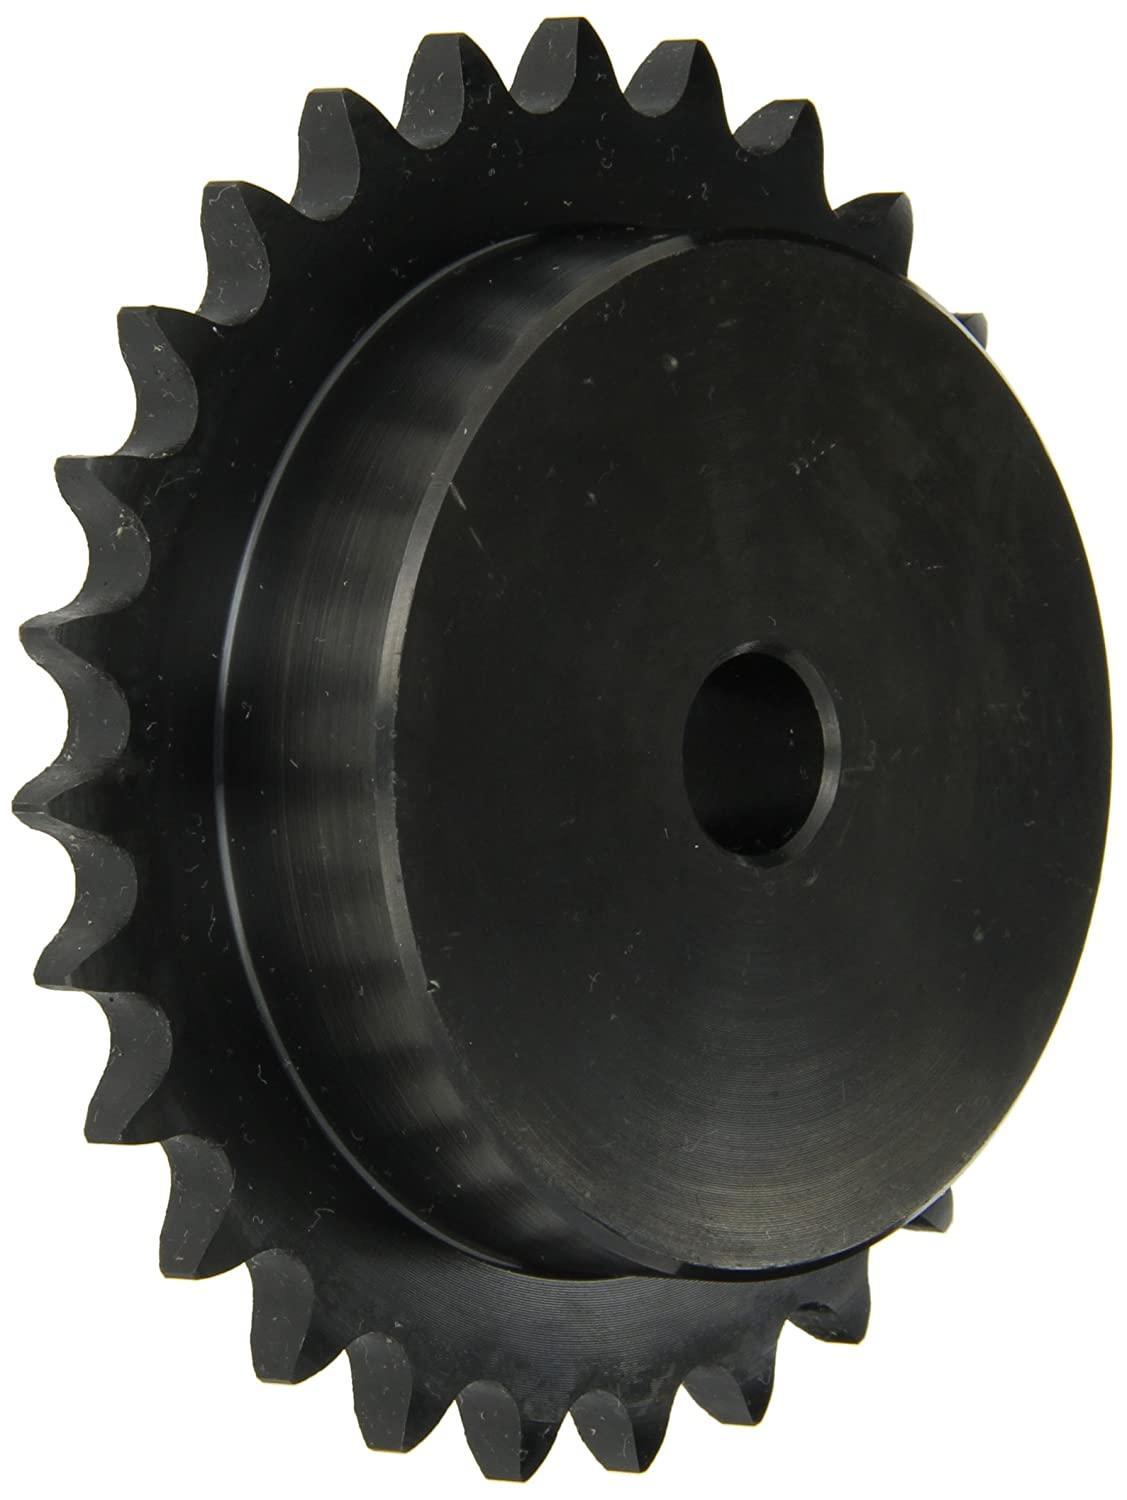 100B28 Roller Chain Sprocket With Stock Bore - Forces Inc